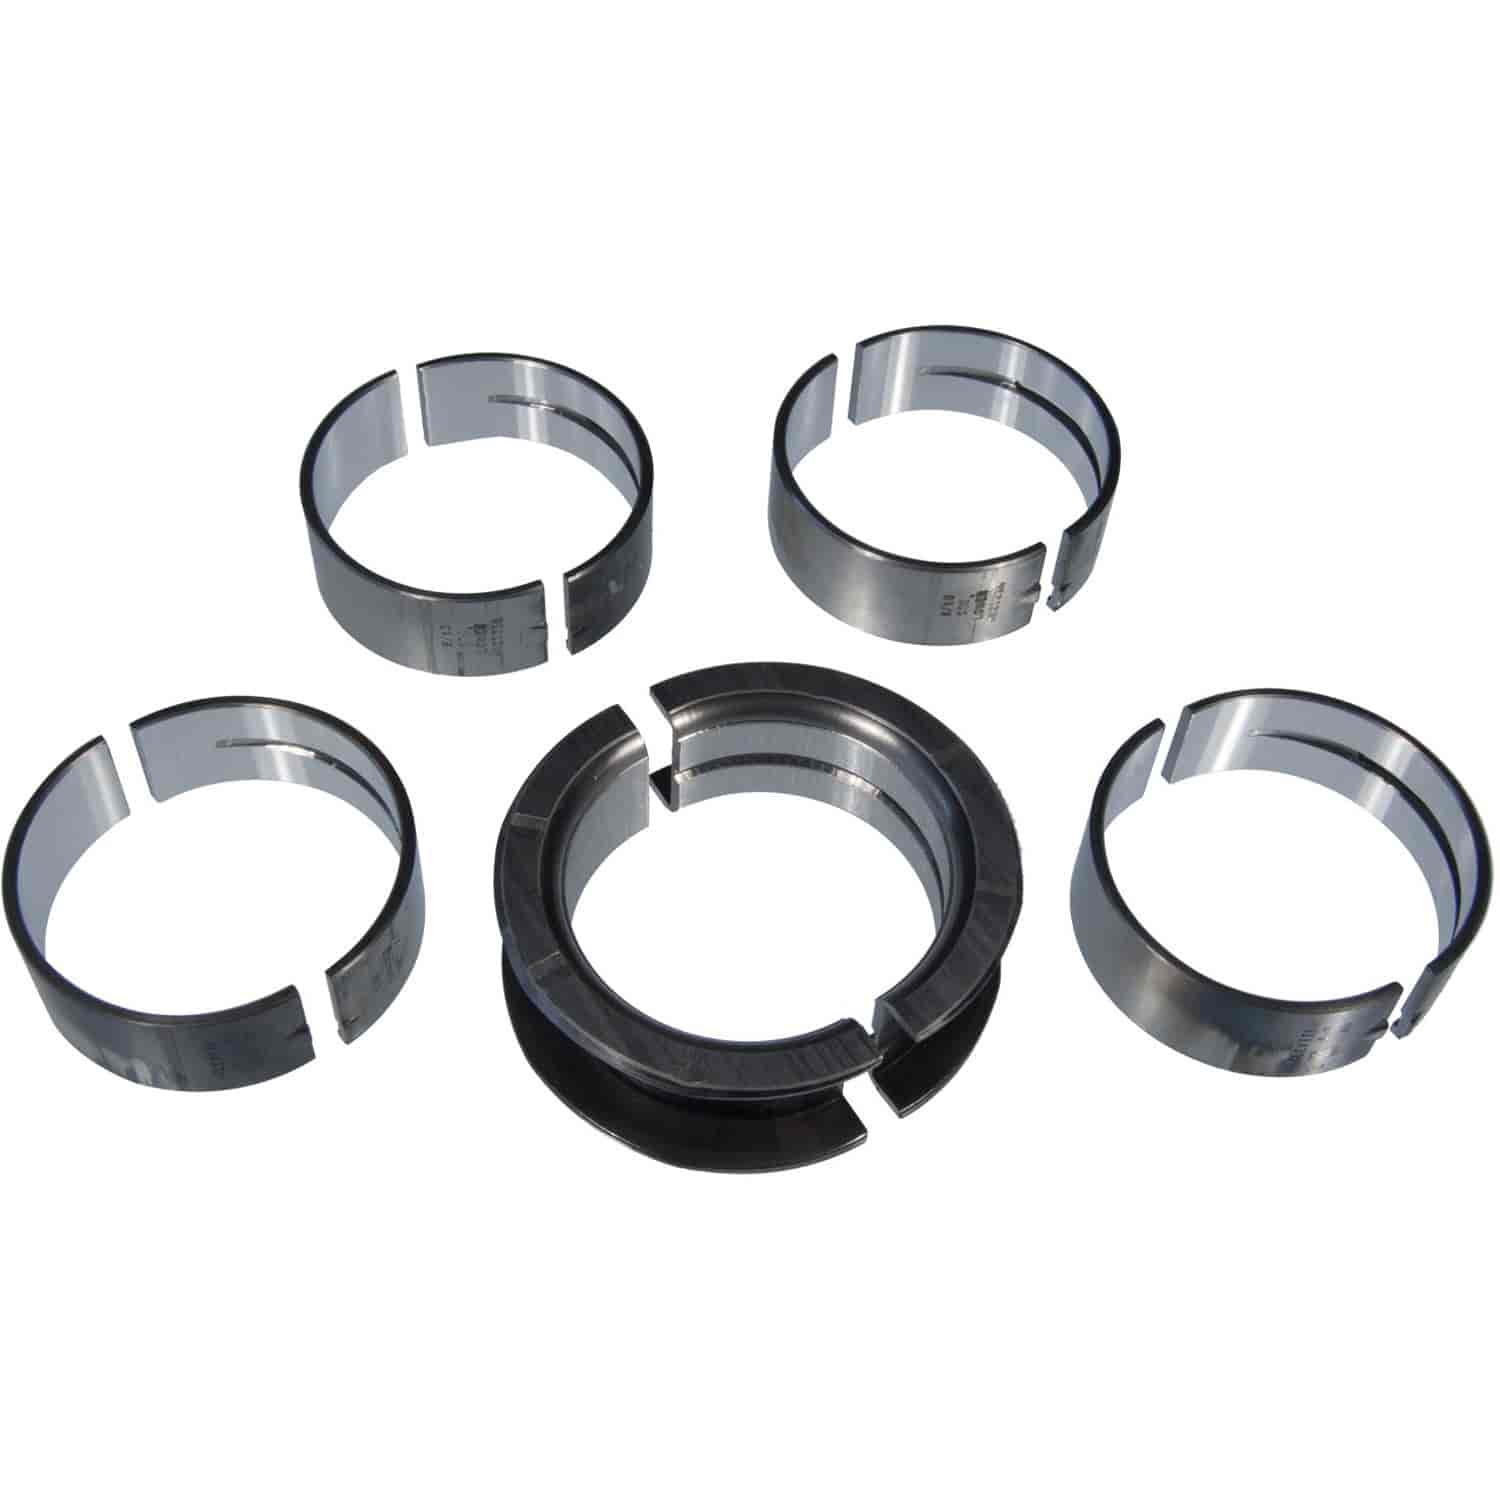 Main Bearing Set Ford 1962-2001 V8 221/255/260/289/302 (3.6/4.2/4.3/4.7/5.0L) with -.040" Undersize